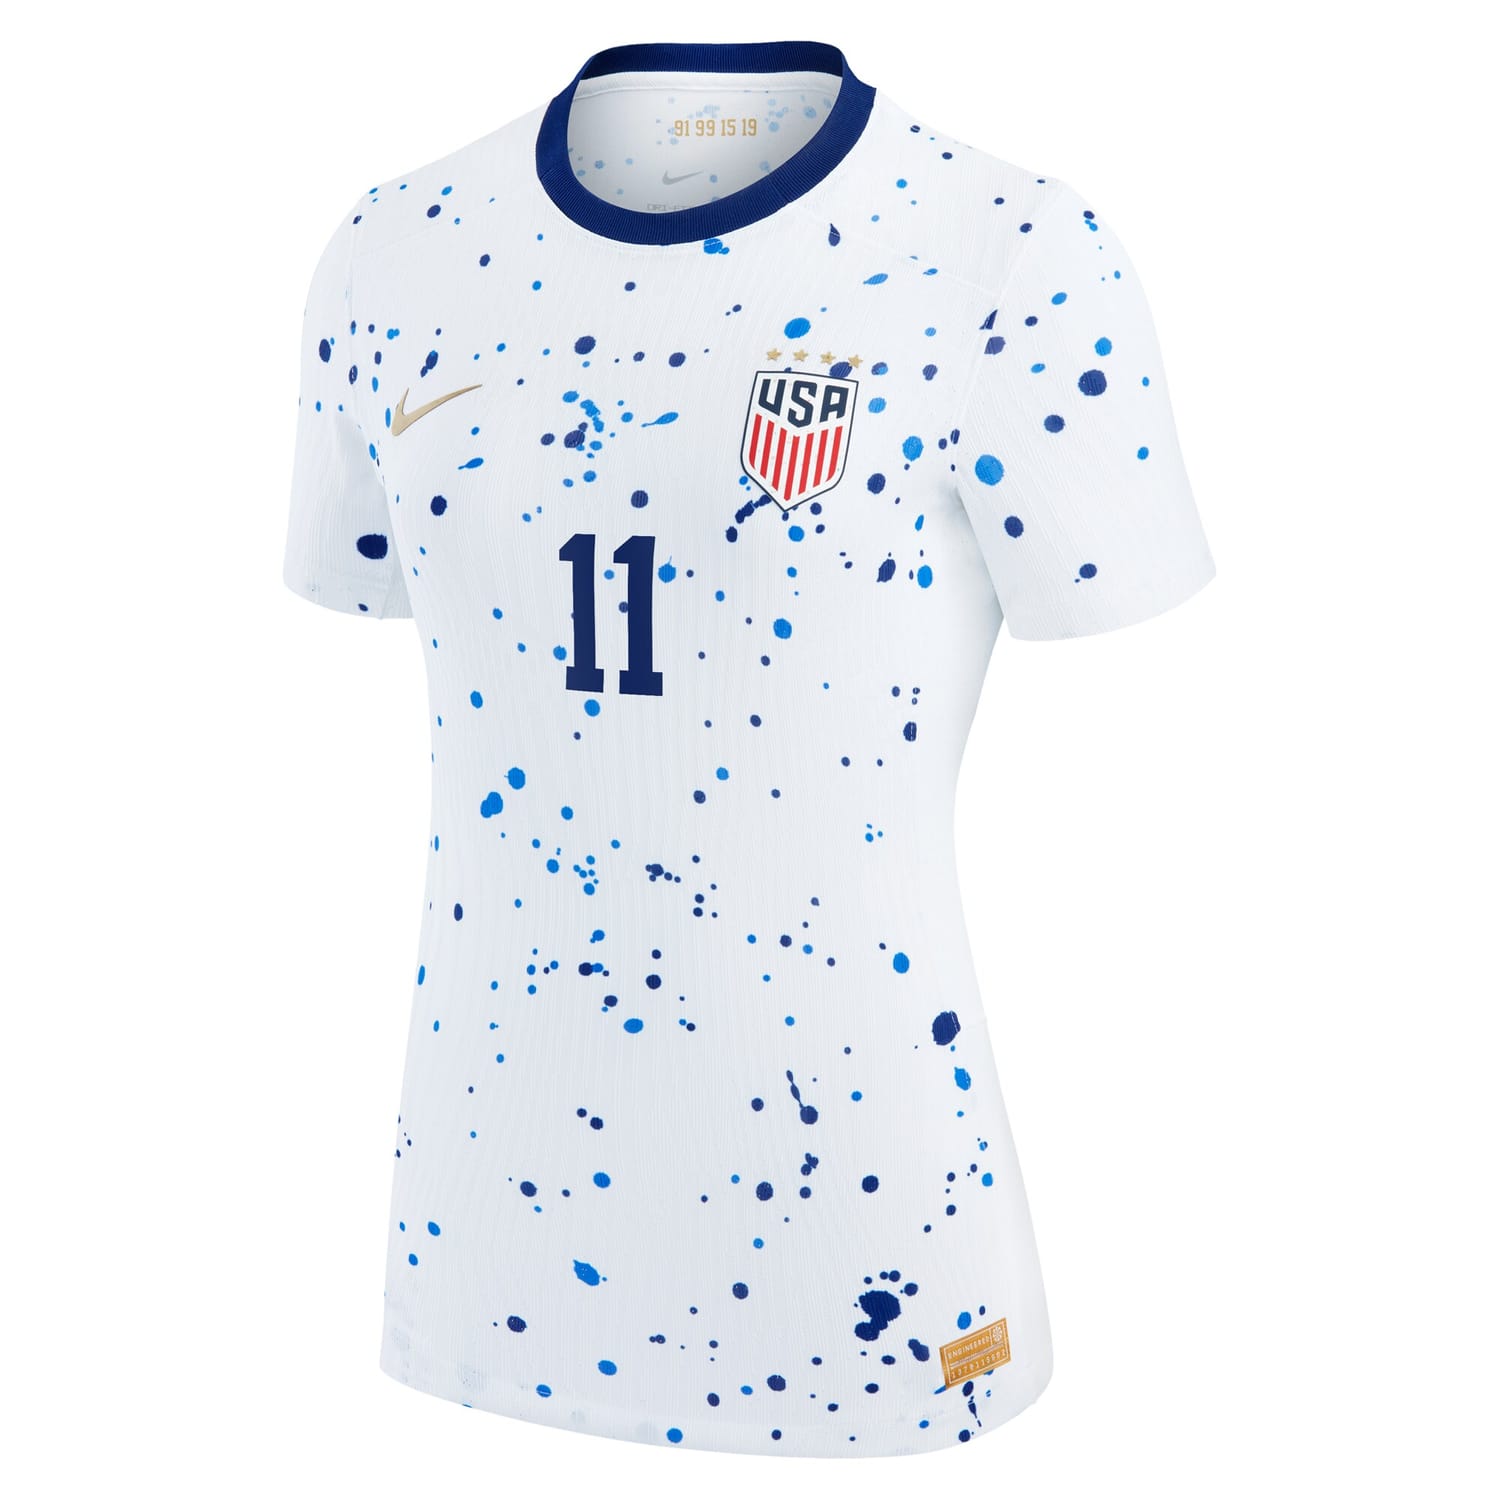 USWNT Home Authentic Jersey Shirt White 2023 player Sophia Smith printing for Women